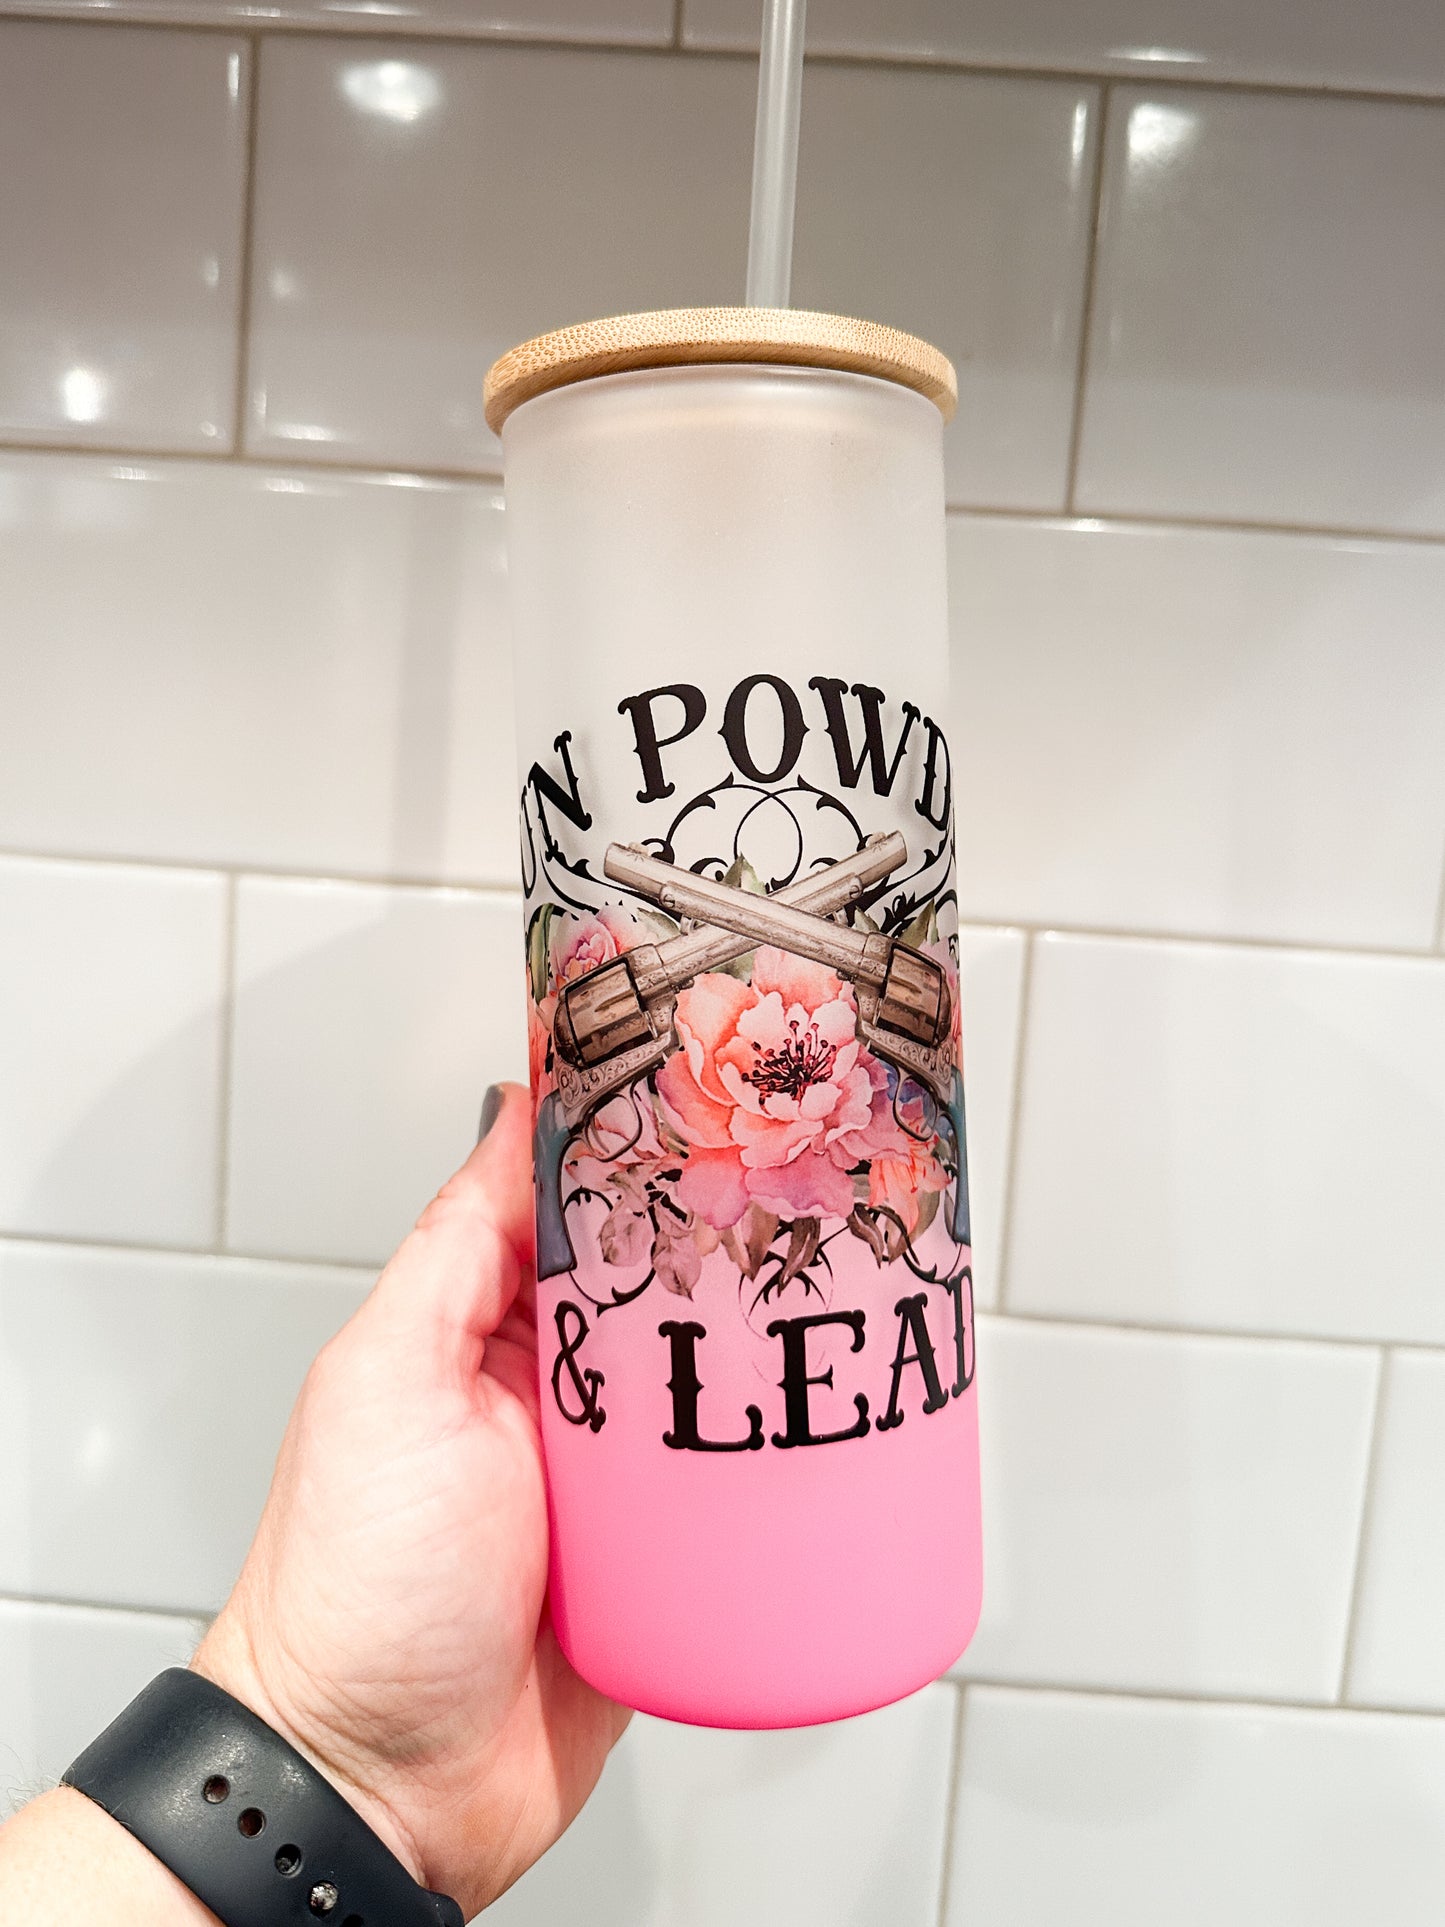 Gun Powder and Lead | Cowgril Pretty | 25 oz Glass Tumbler with Bamboo Lid | Frosted Pink Glass | Iced Coffee Lover